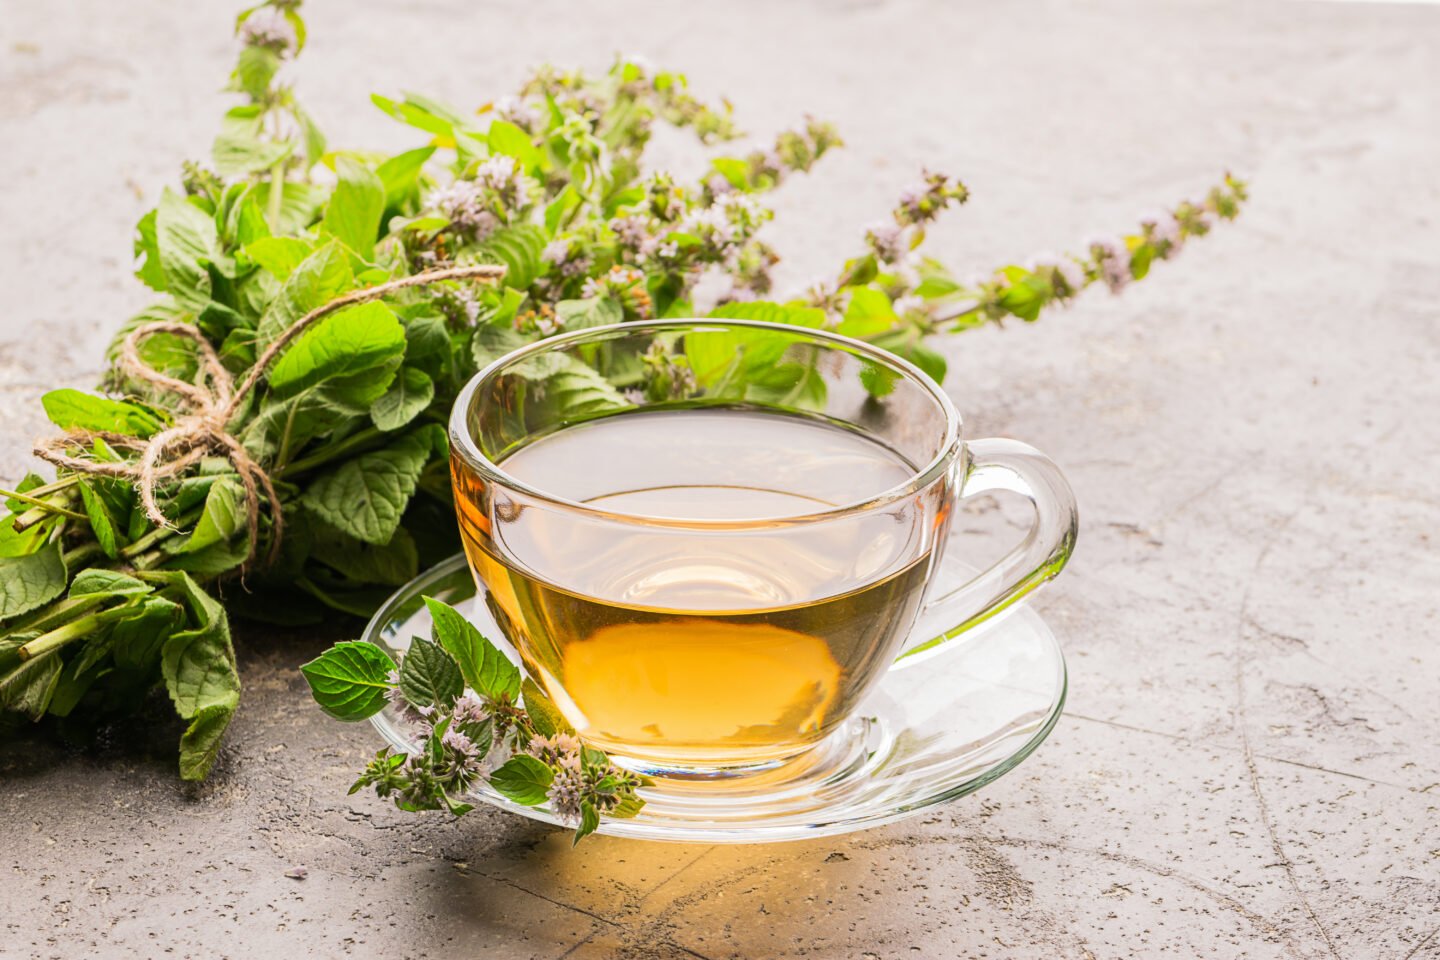 Cup of tea drink with fresh leaves of peppermint melissa gray background. Healing herbal drink. Horizontal frame.